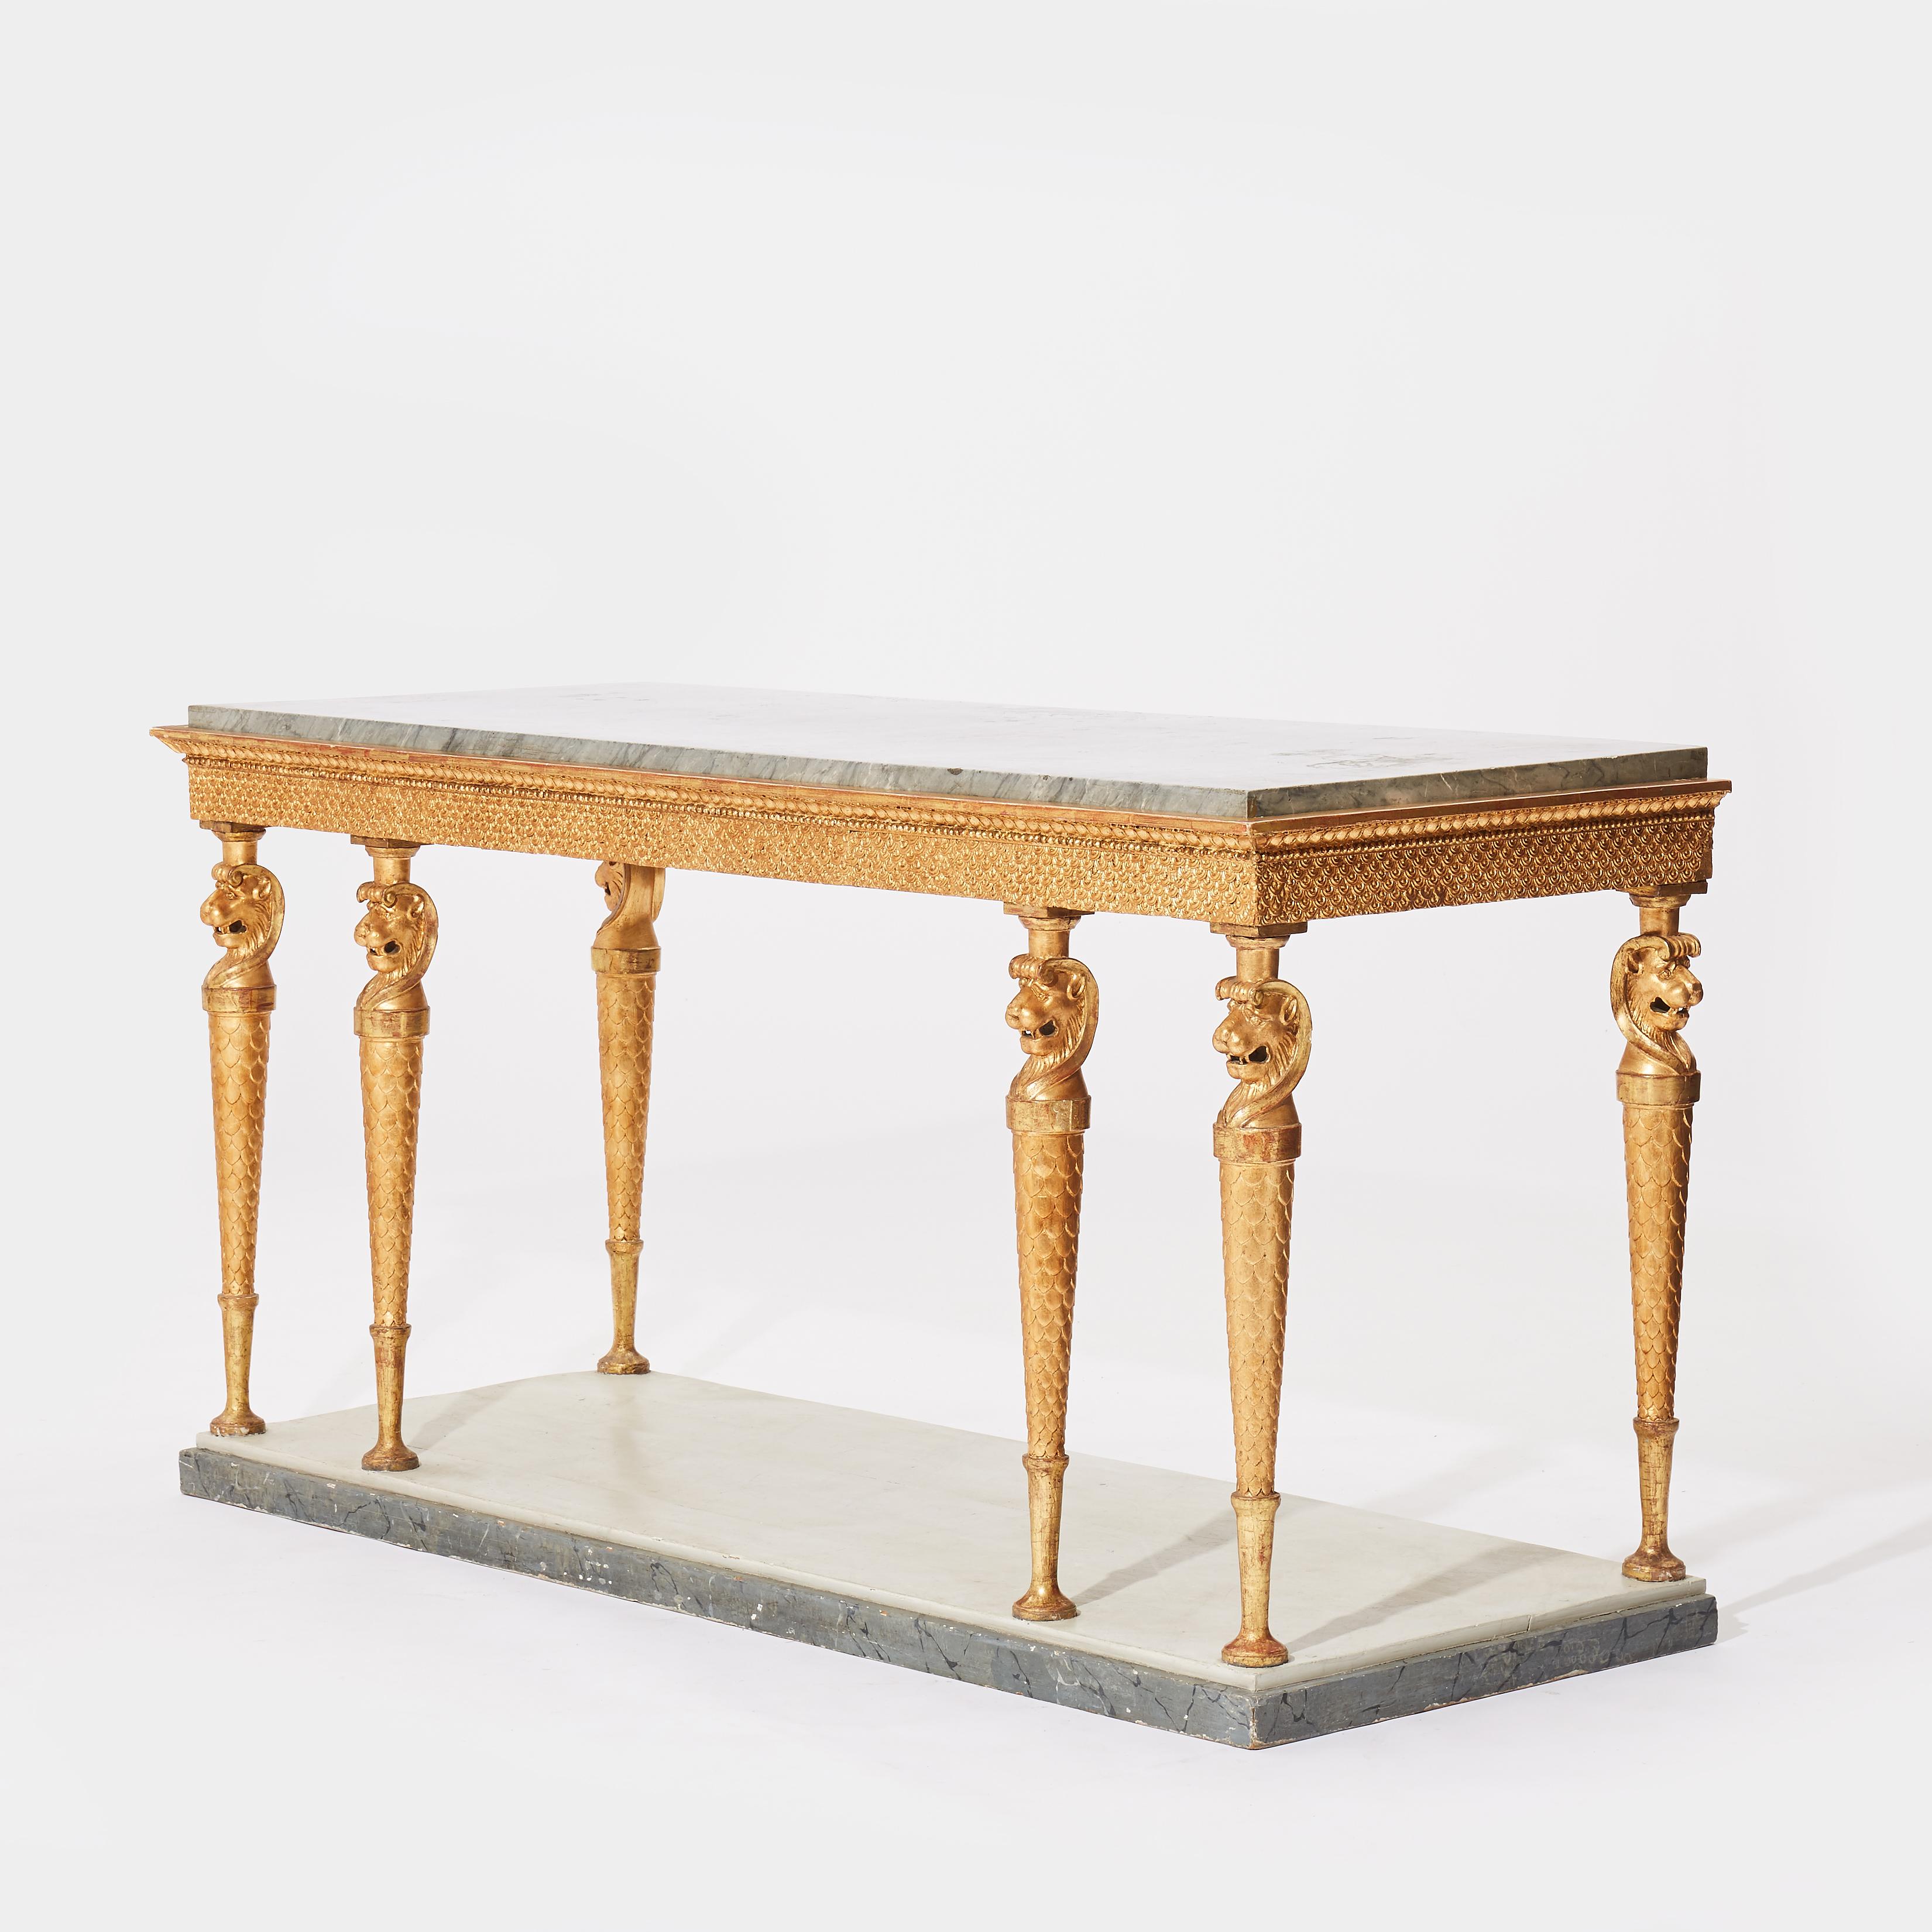 A Swedish Empire Gilt wood Console Table, Marble Top, Early 19th Century (Schwedisch)